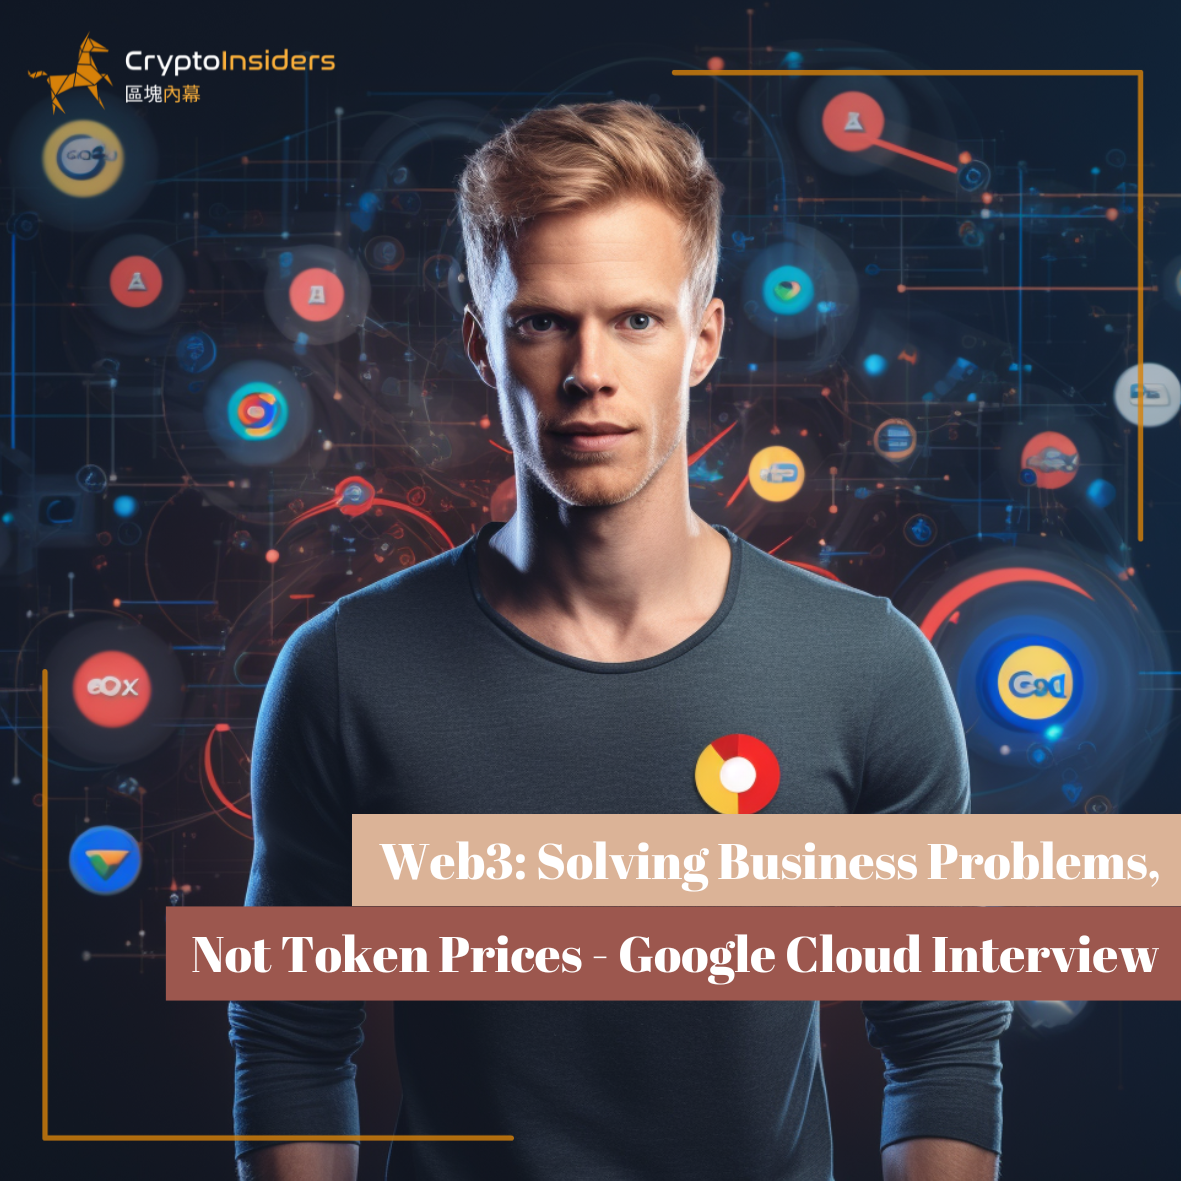 Web3-Solving-Business-Problems-Not-Token-Prices-Google-Cloud-Interview-Crypto-Insiders-Hong-Kong-Blockchain-News